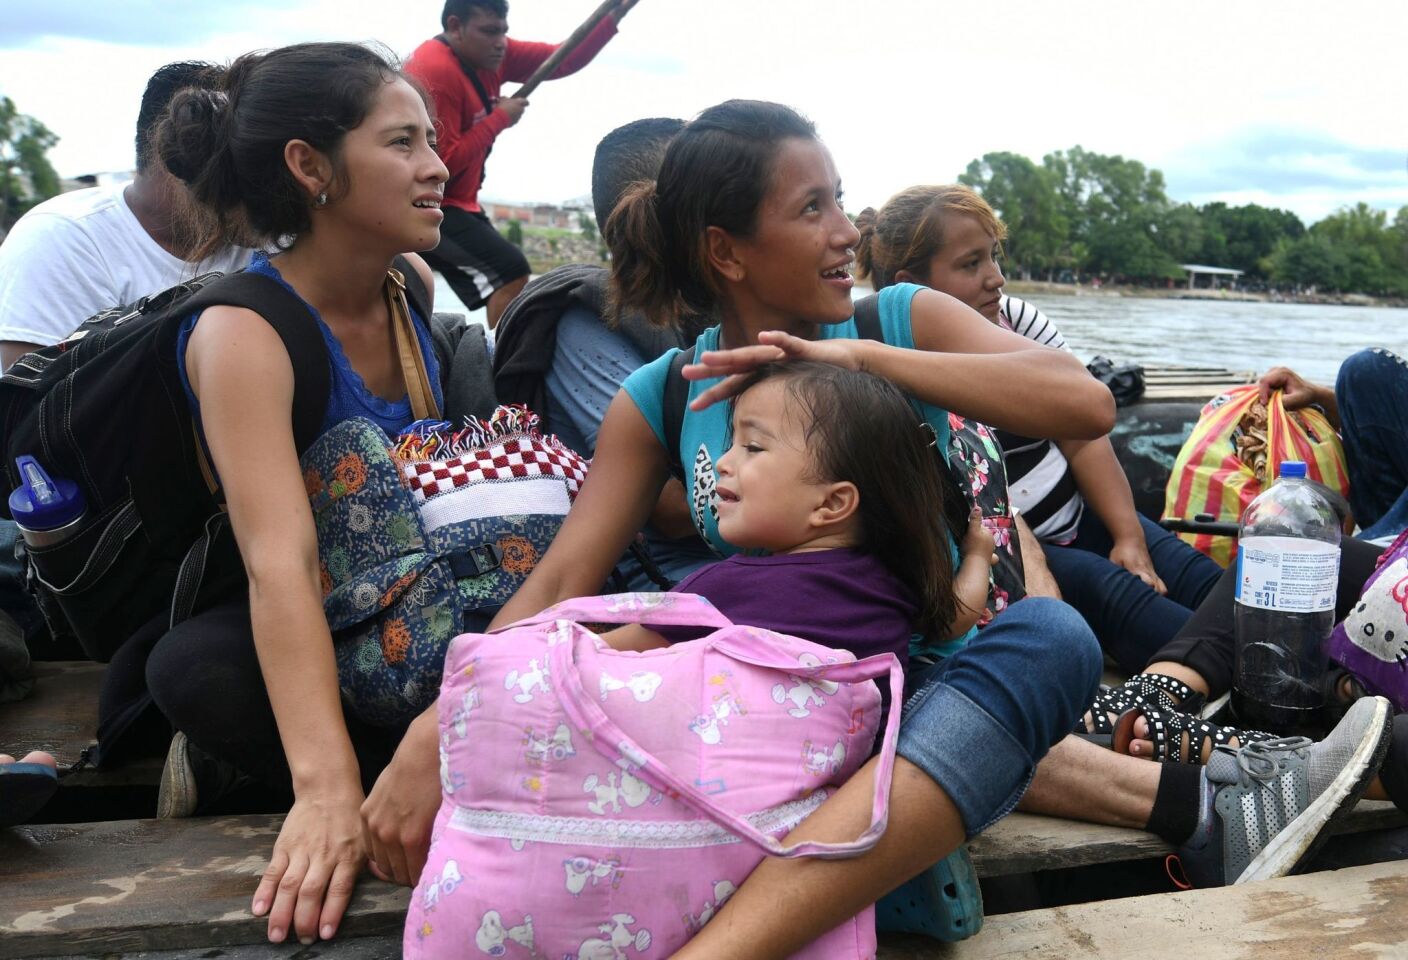 Honduran migrants taking part in a caravan heading to the United States board makeshift rafts to cross the Suchiate River, natural border between Guatemala and Mexico, in Ciudad Tecun Uman, Guatemala.